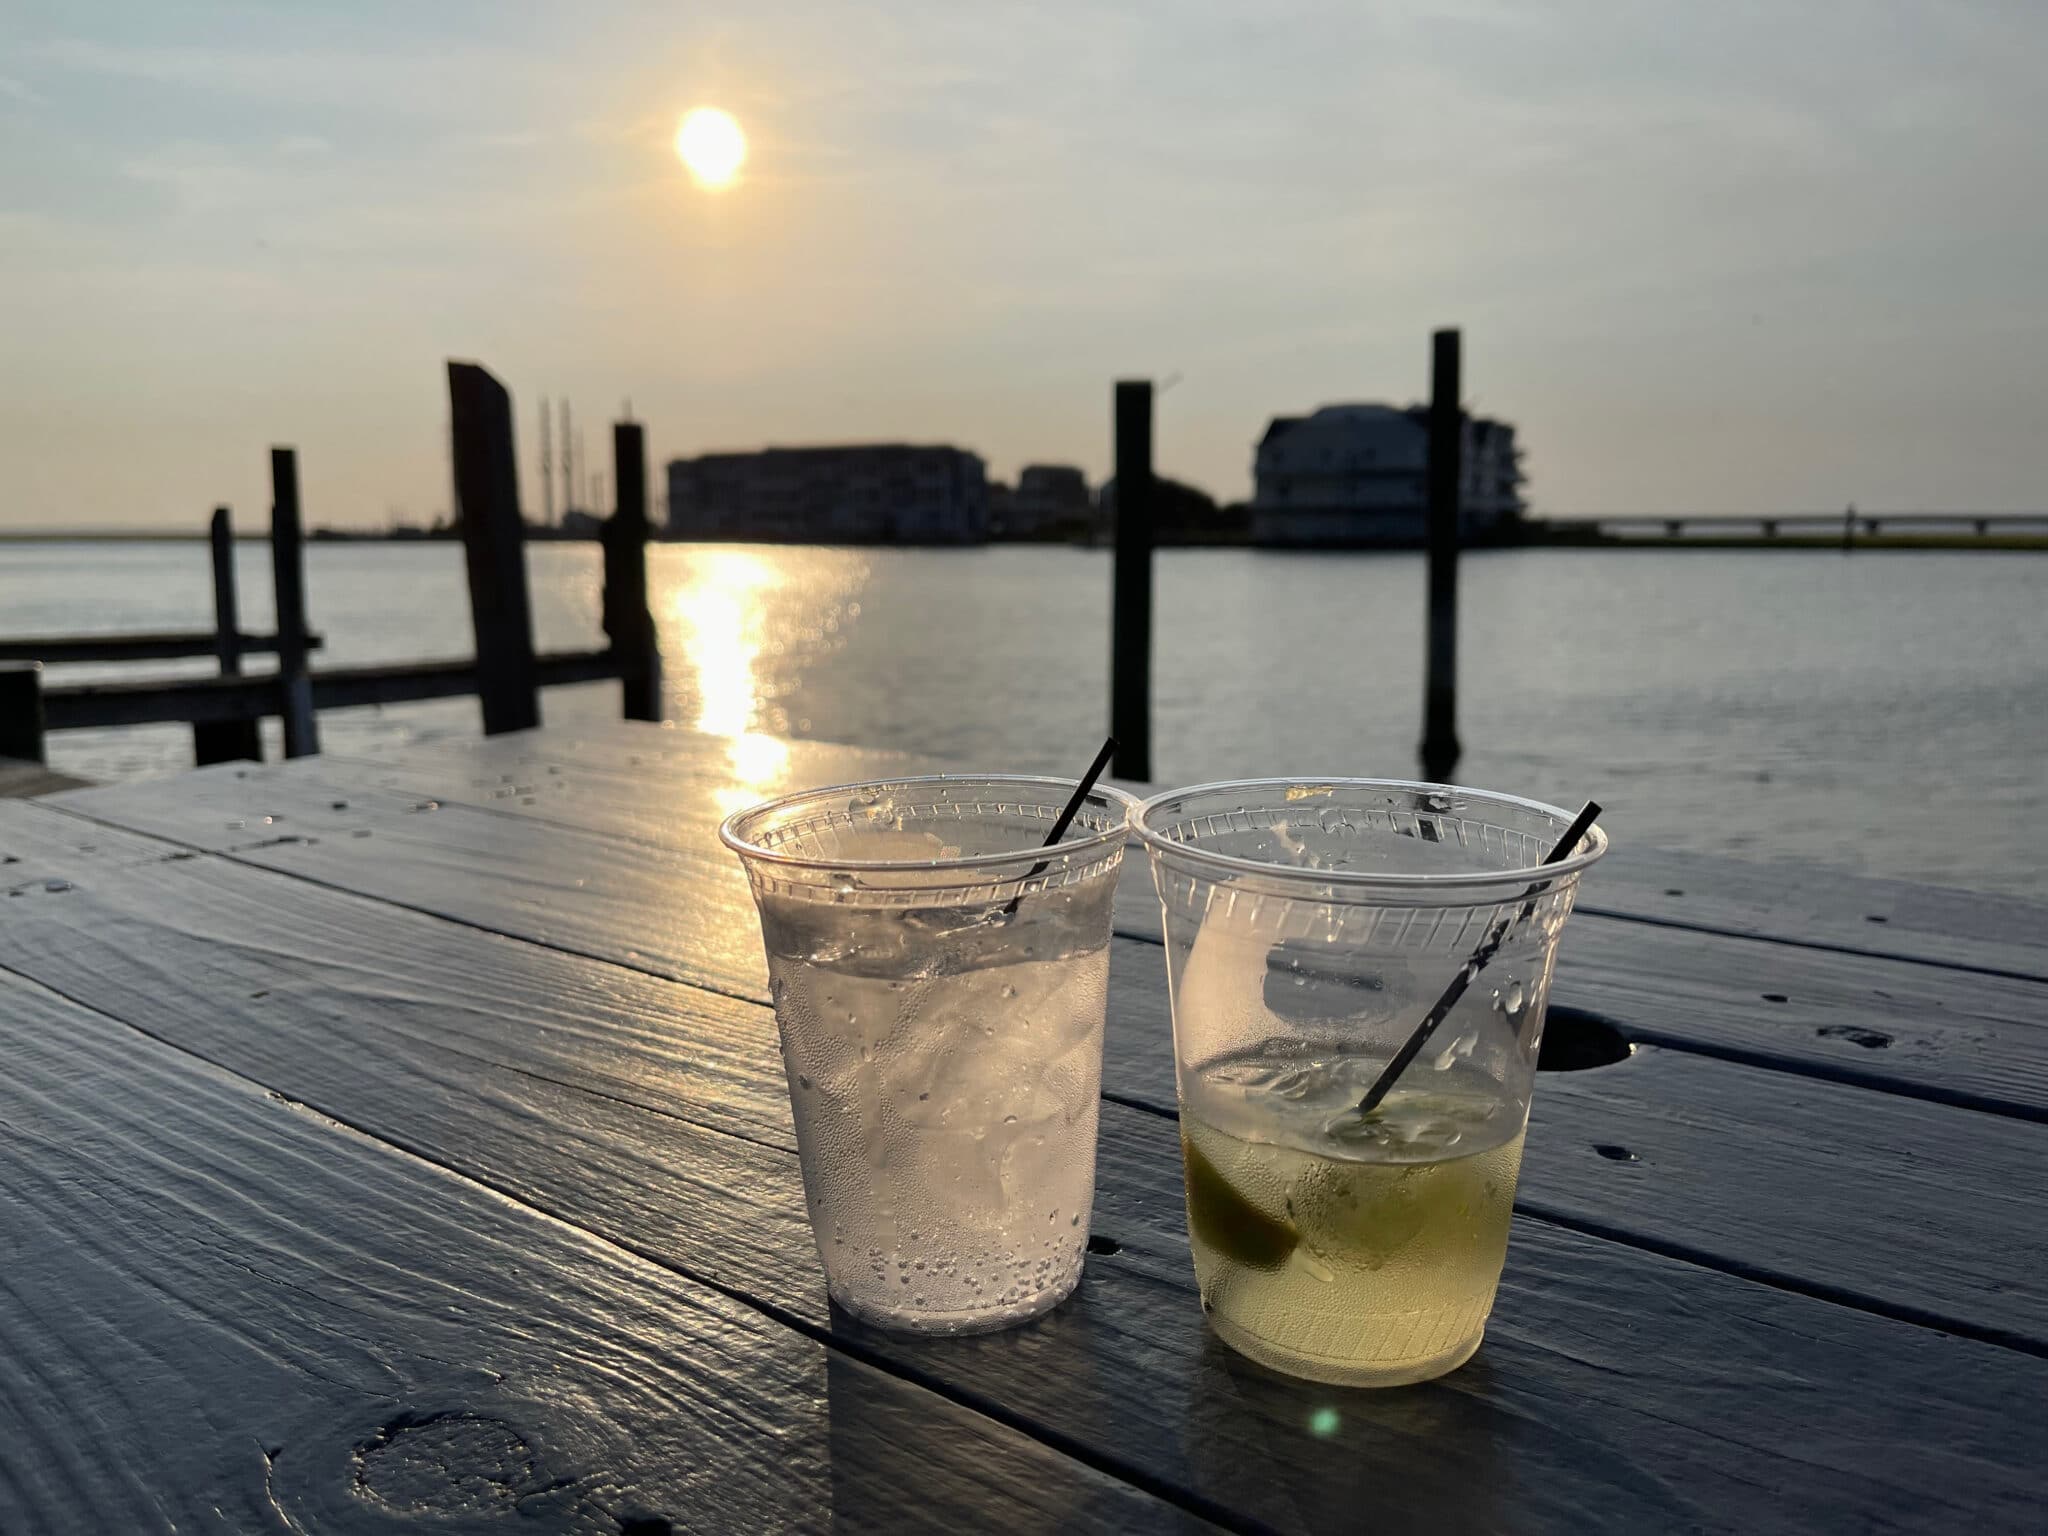 A vodka and tonic and gimlet at Don's in Chincoteague, Virginia. Photo by ConsumerMojo.com